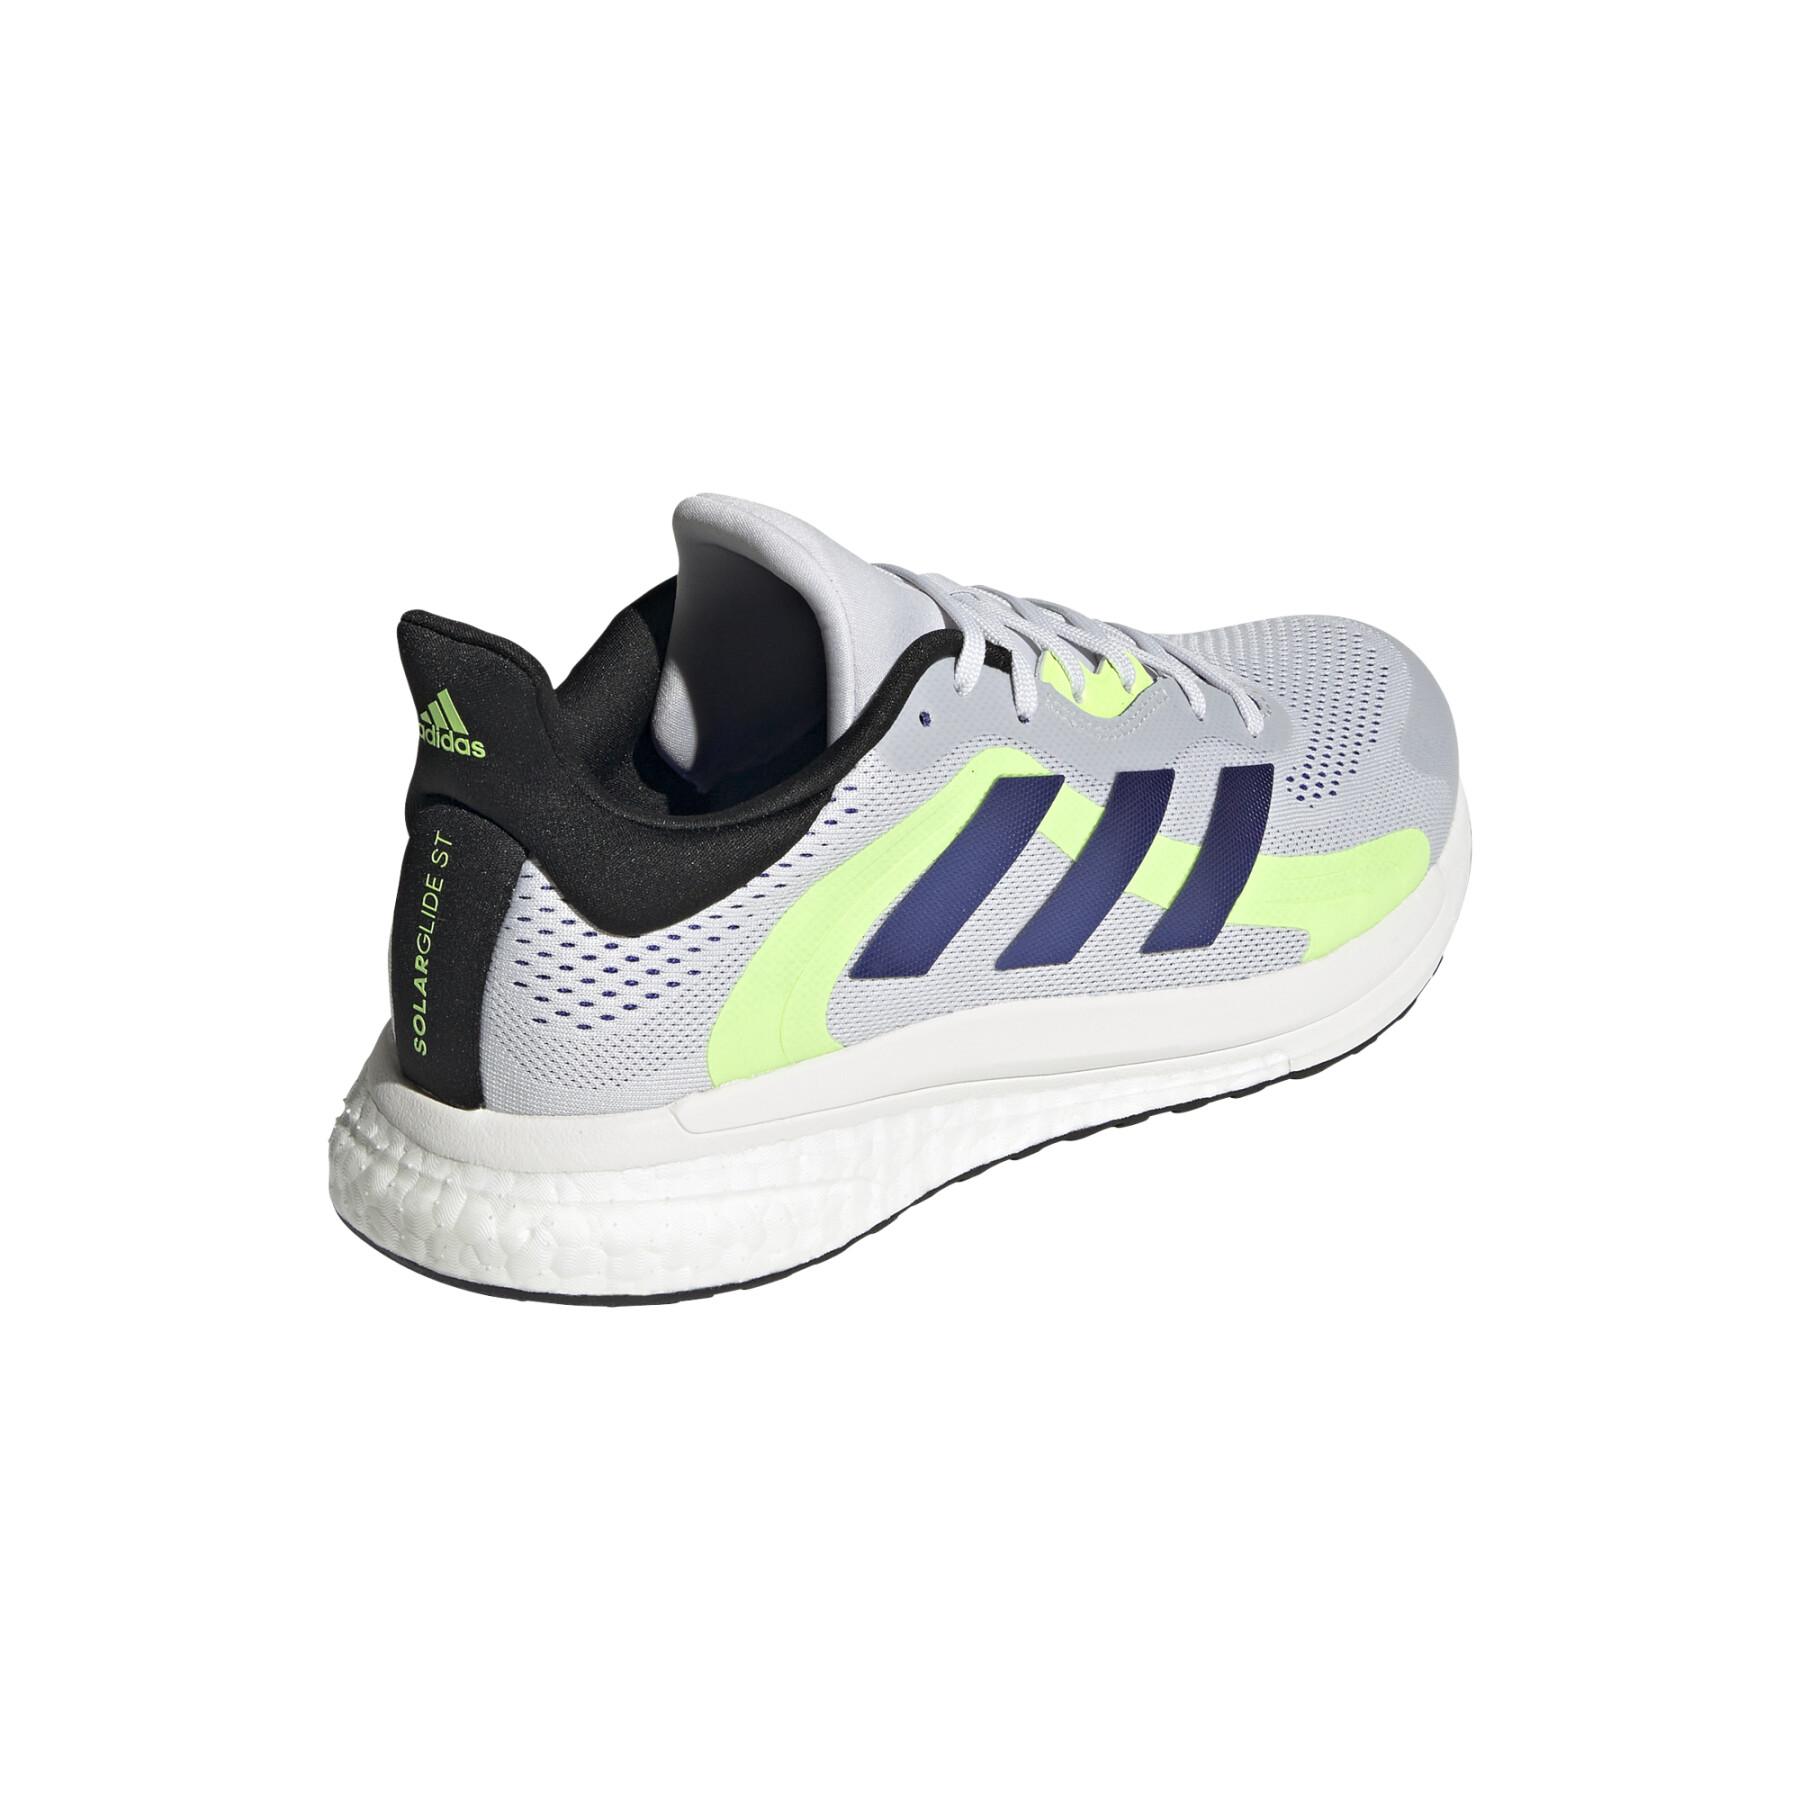 Buty adidas SolarGlide 4 ST